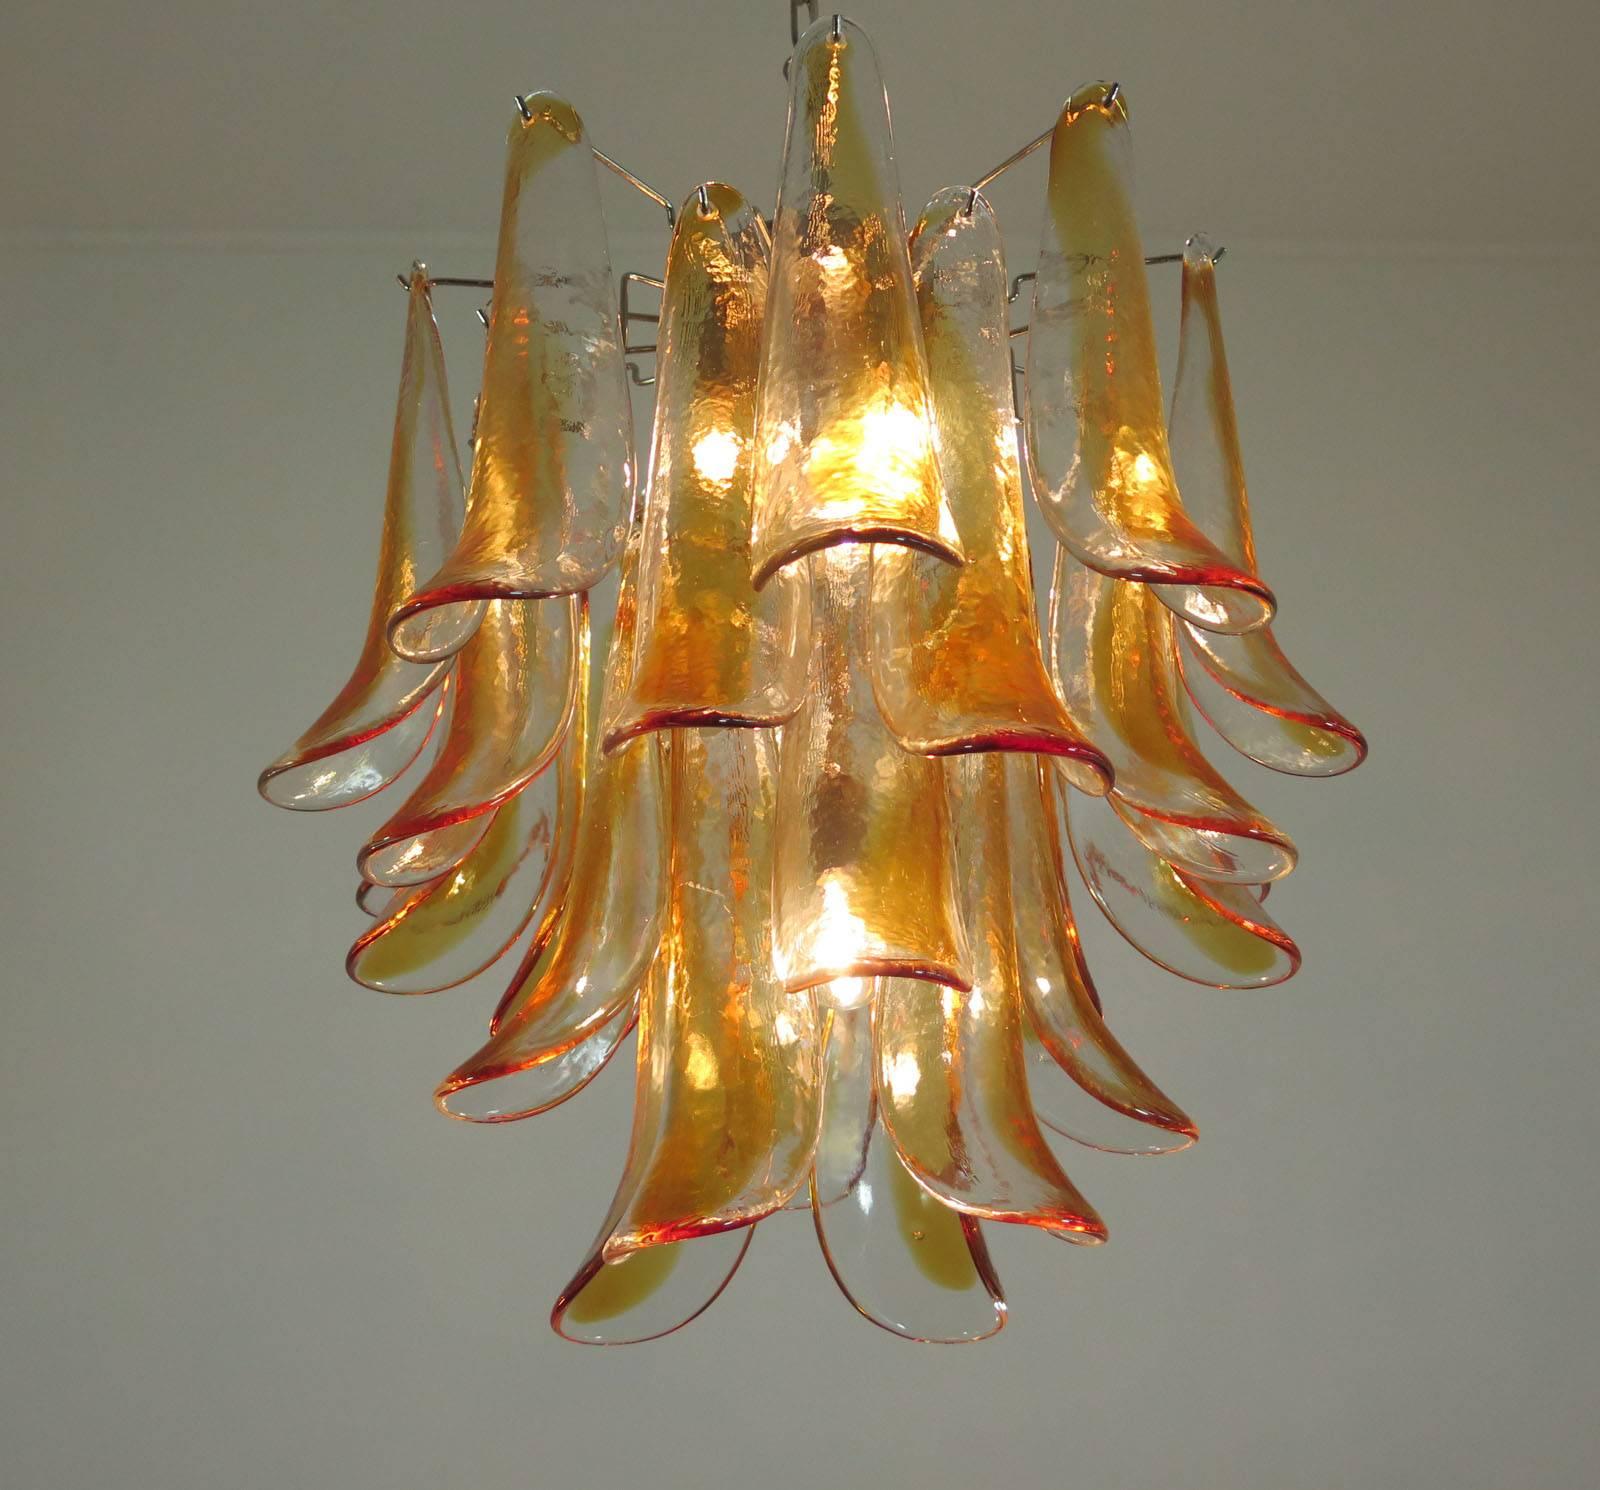 Italian vintage Murano chandelier made by 26 glass petals (transparent and amber) in a chrome frame. Dimensions: 47.25 inches (120 cm) height with chain; 23.62 inches (60 cm) height without chain; 19.70 inches (50 cm) diameter. Dimension glasses: